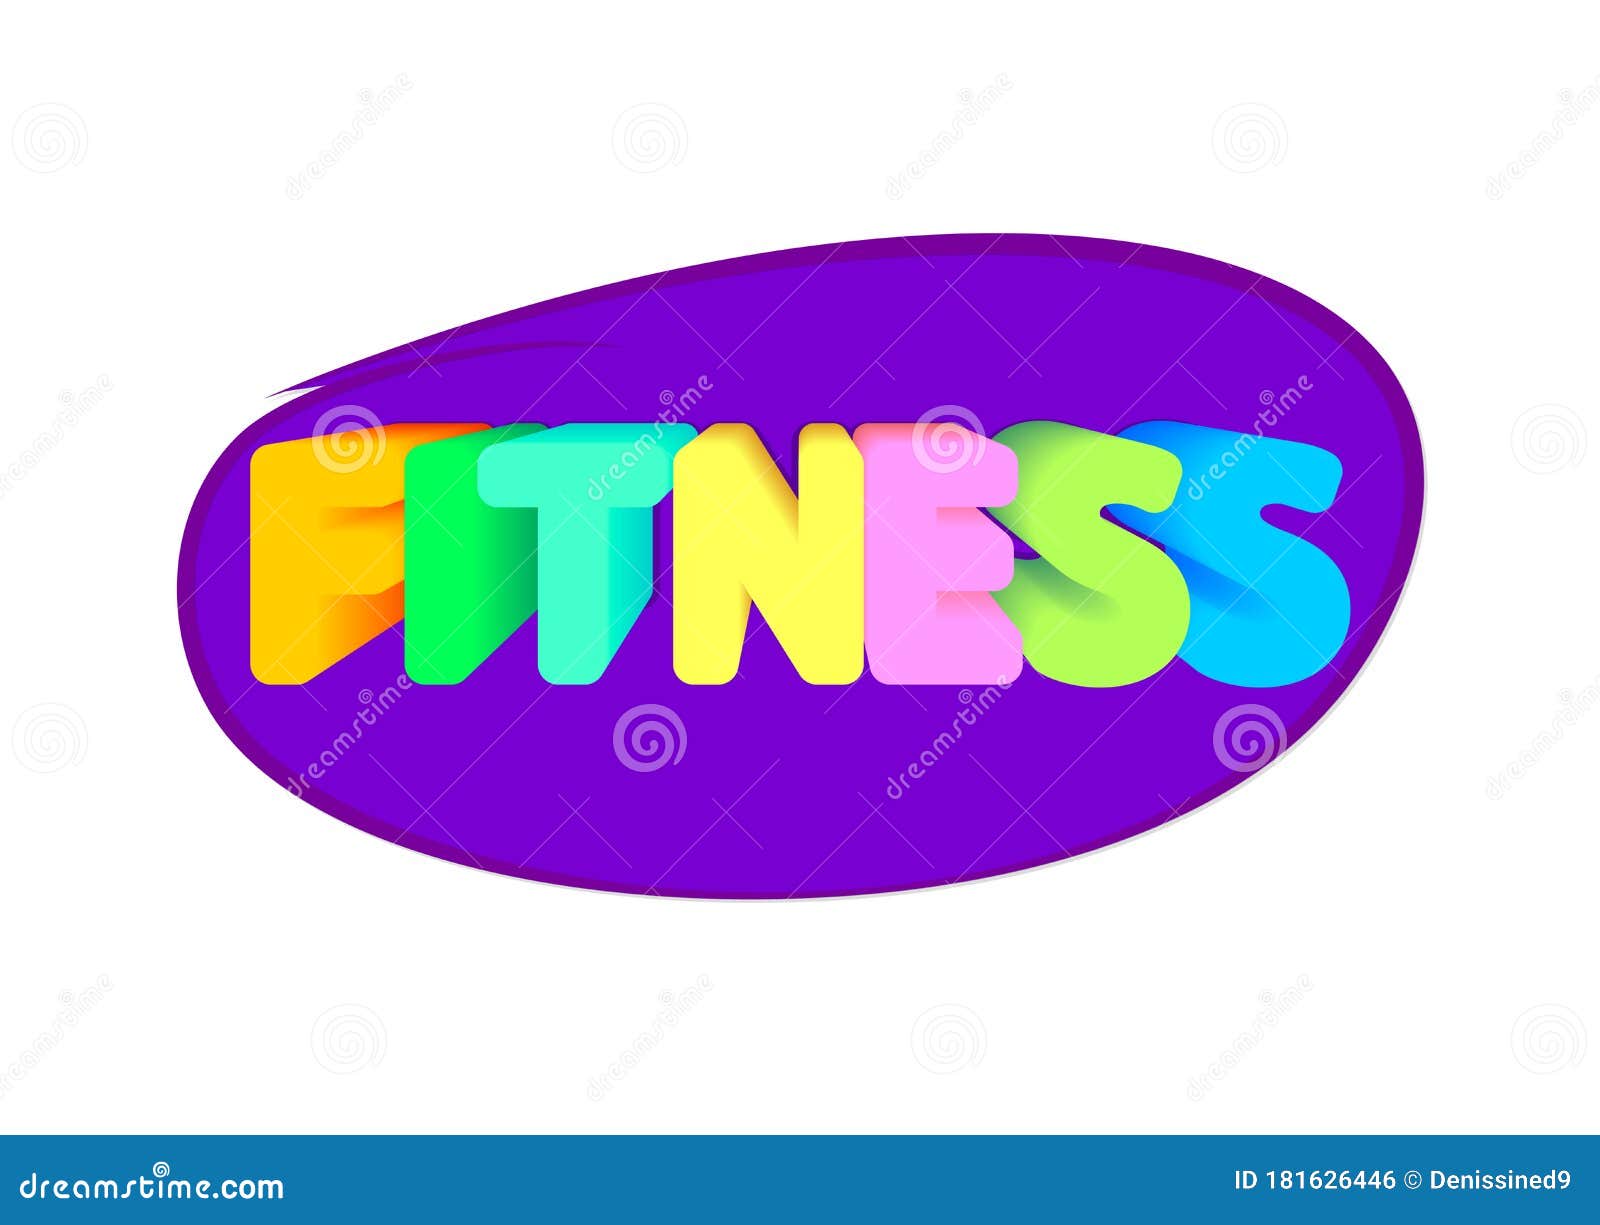 Fitness Club Isolated Sticker Word Design Template Vector Illustration Stock Vector Illustration Of Business Concept